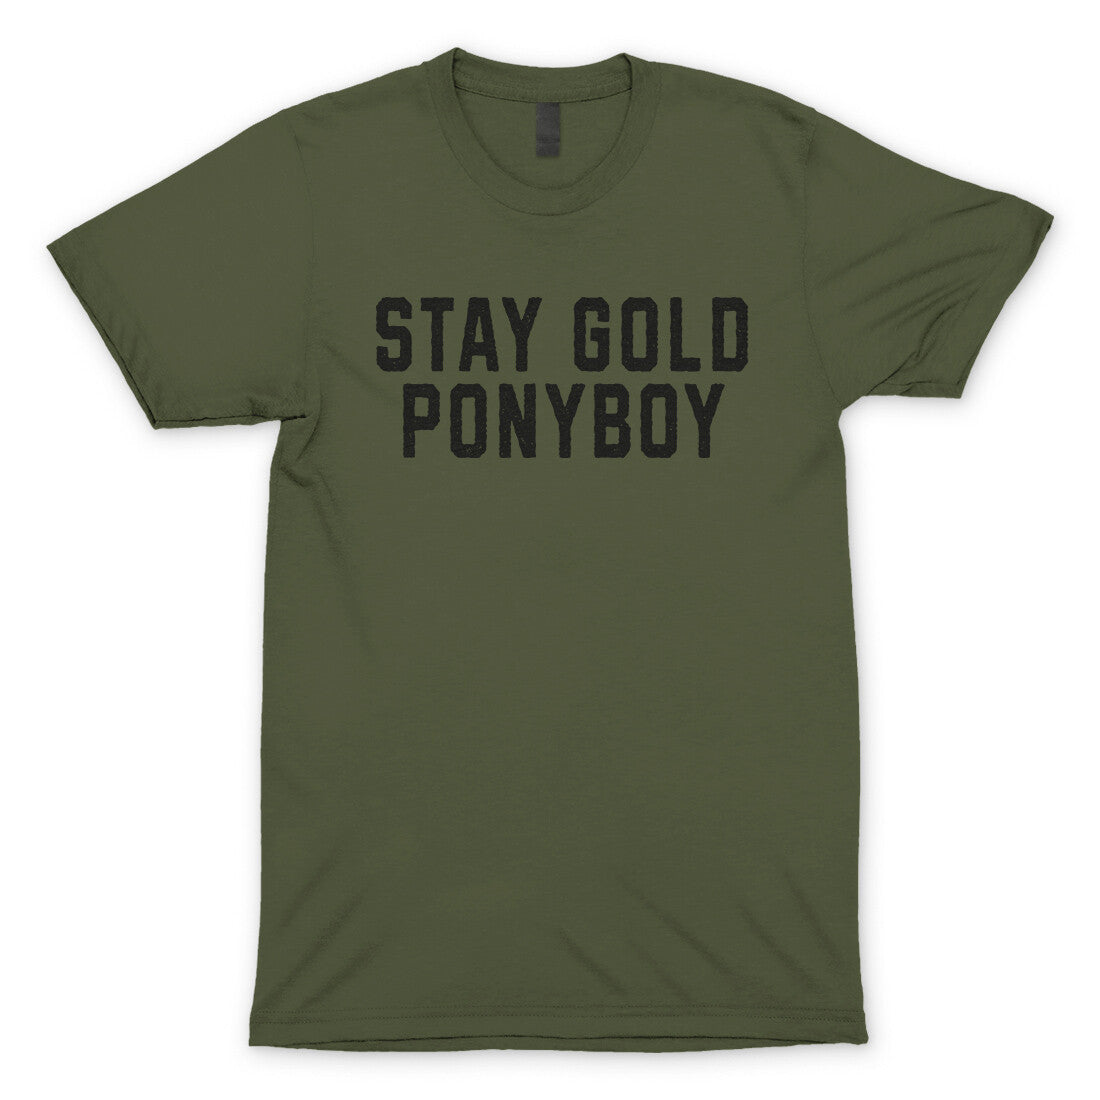 Stay Gold Ponyboy in Military Green Color